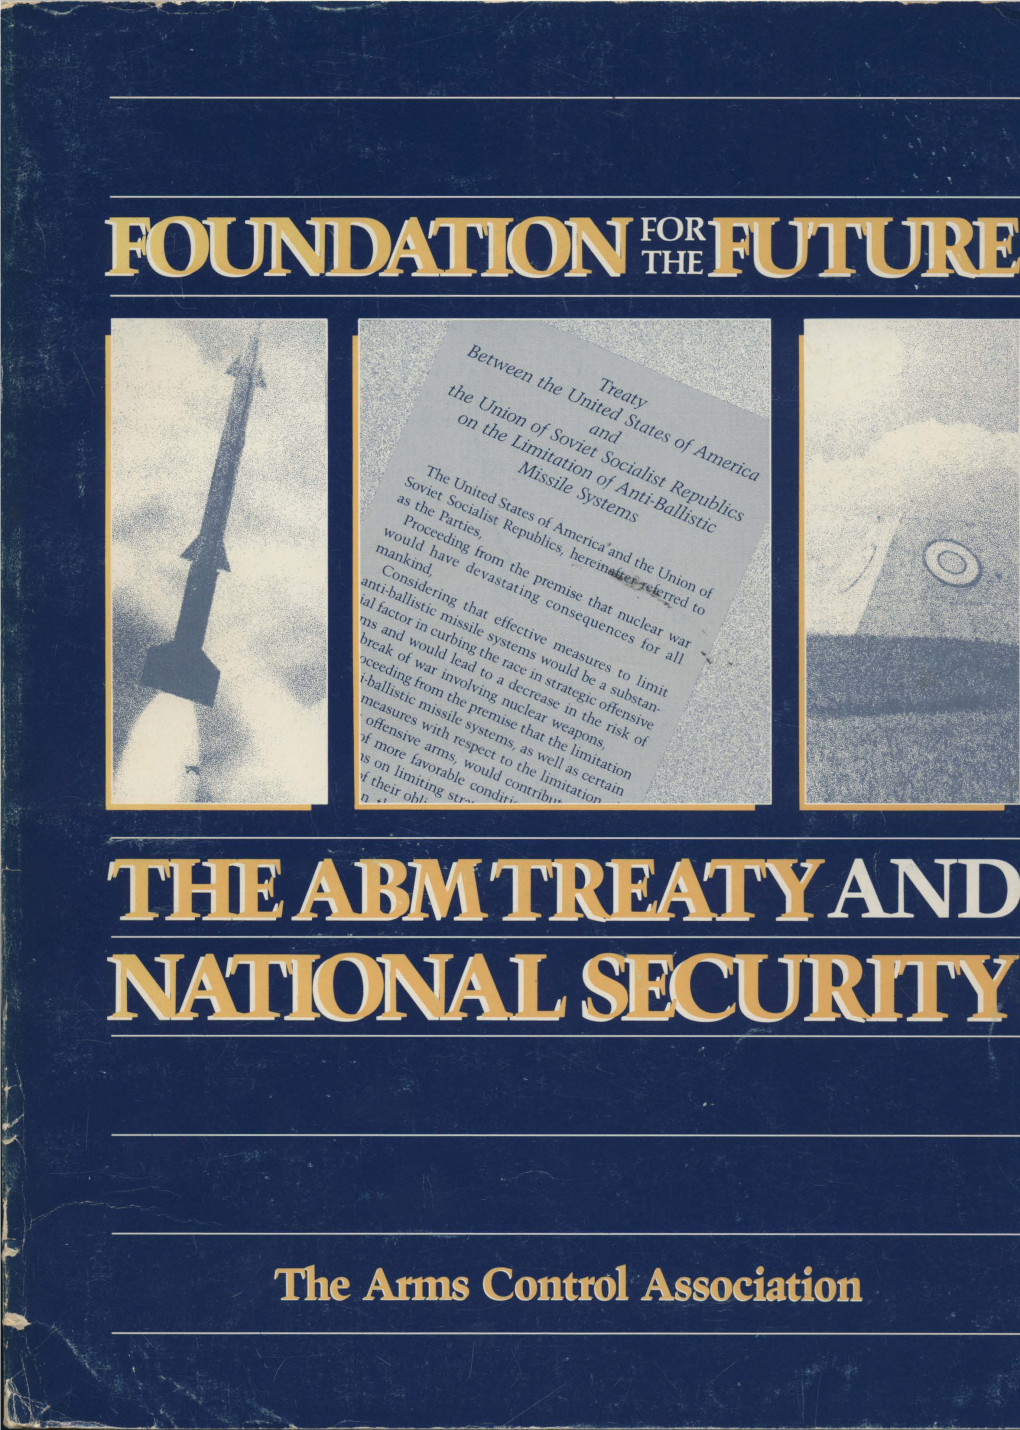 I. the ABM Treaty: Cornerstone of Security and Arms Control